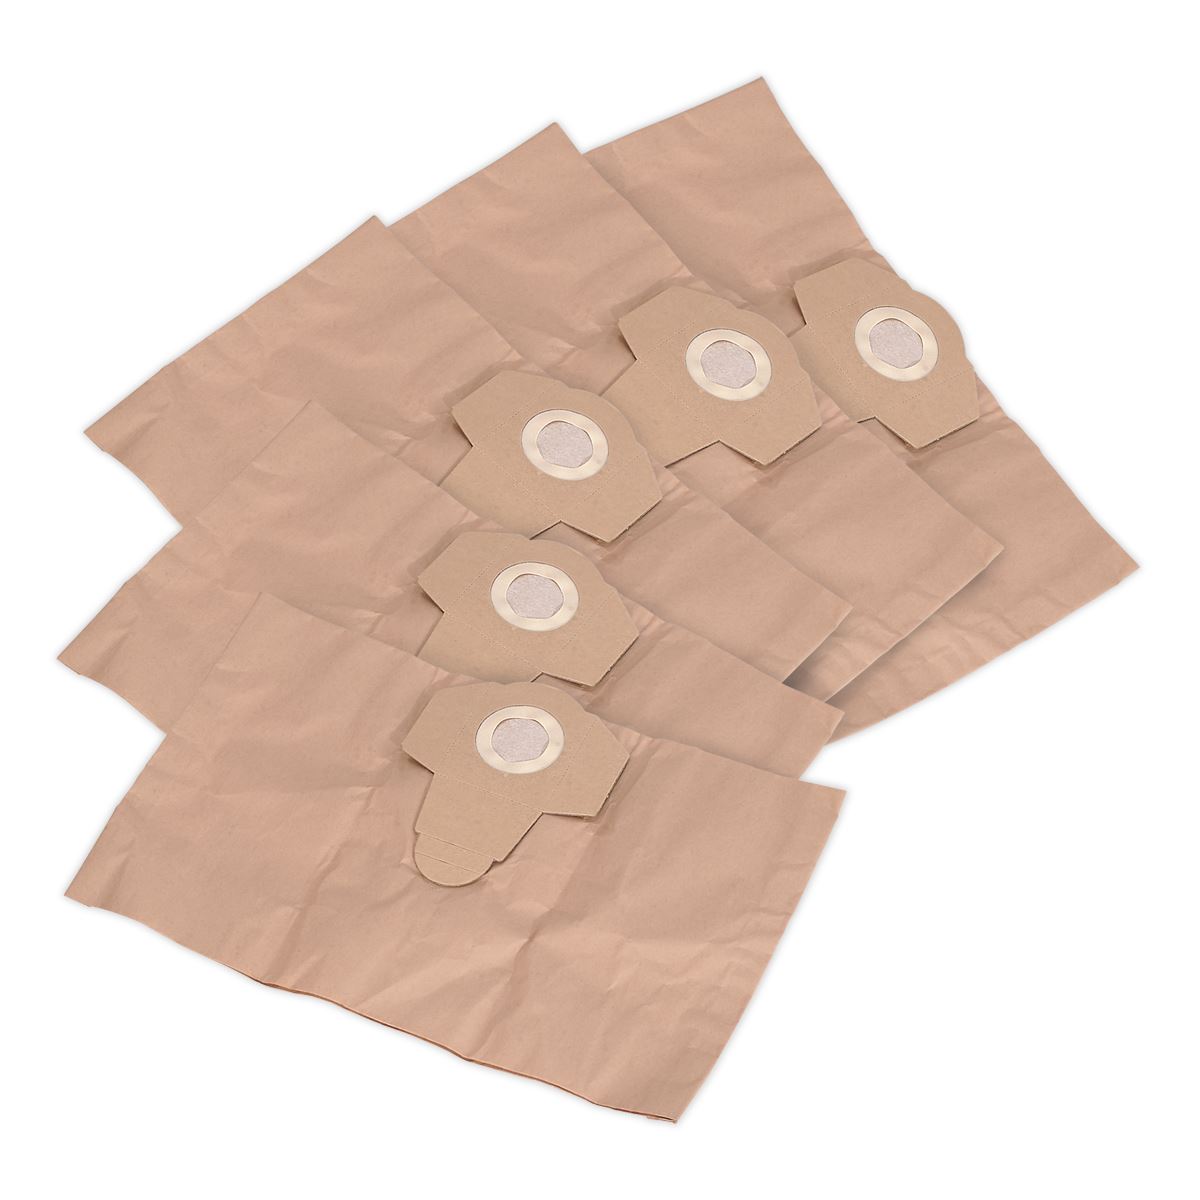 Sealey Dust Collection Bag for PC200 Series Pack of 5